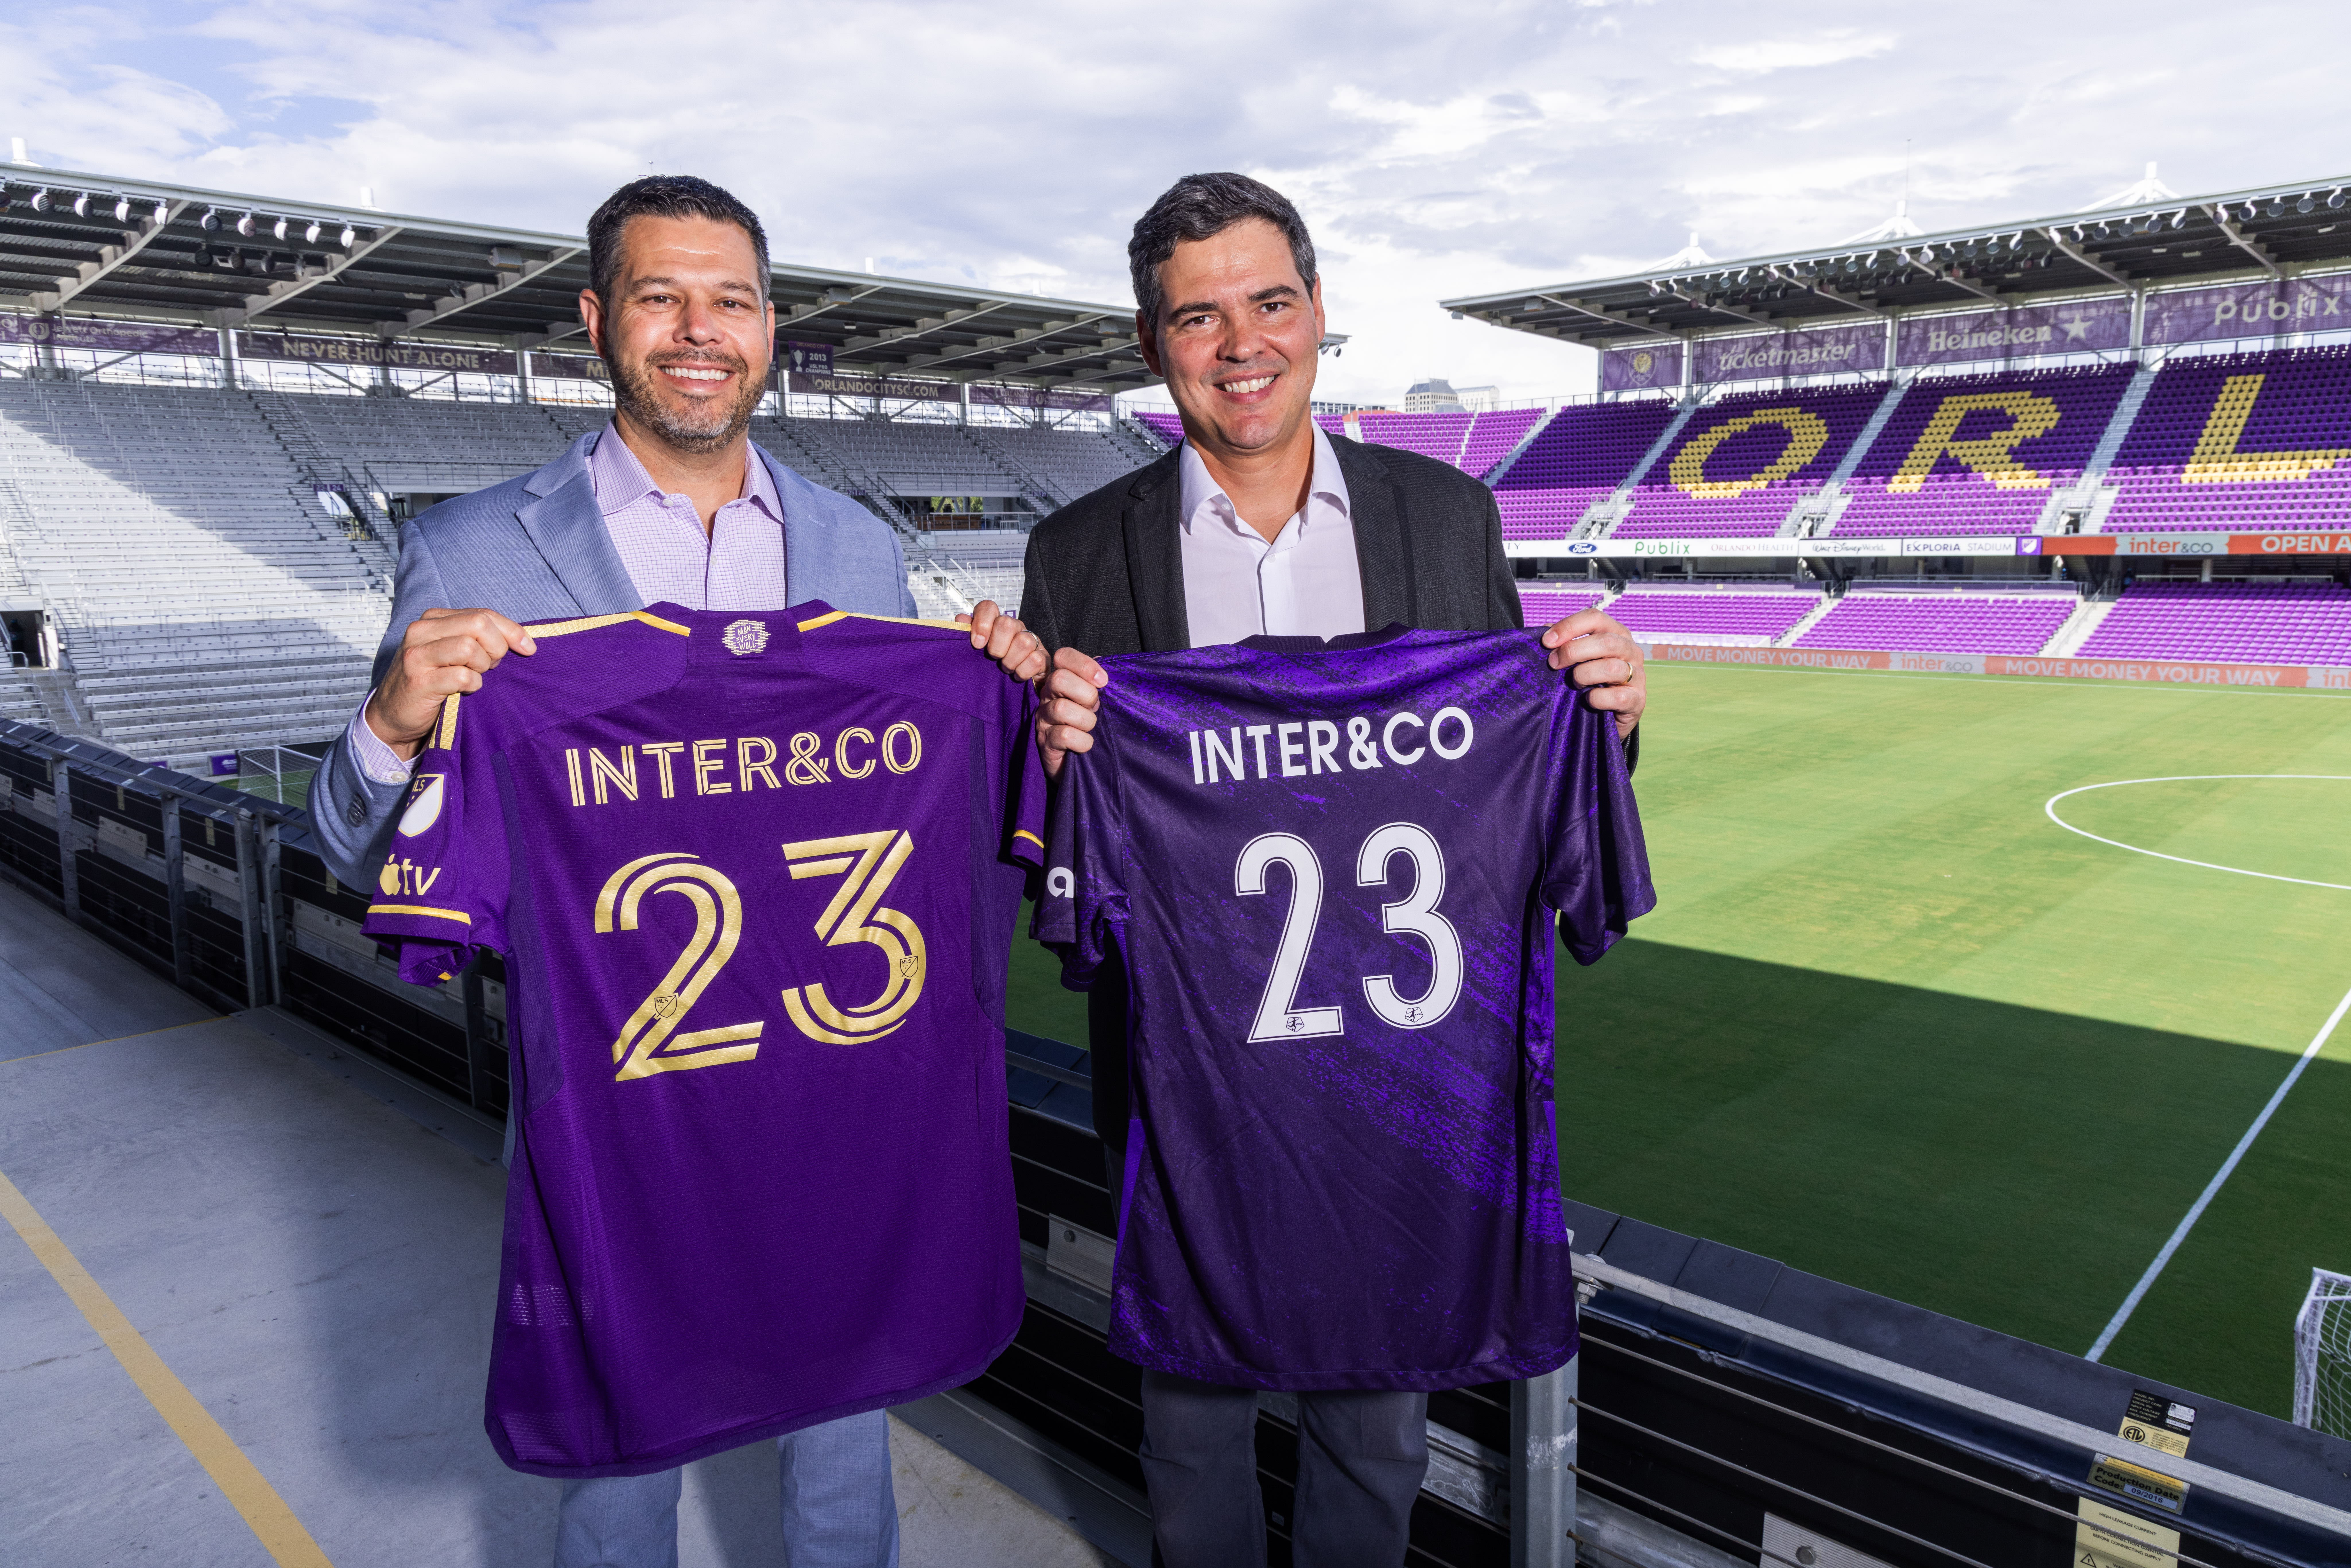 Inter&Co announced as the official financial institution of Orlando City SC and Orlando Pride